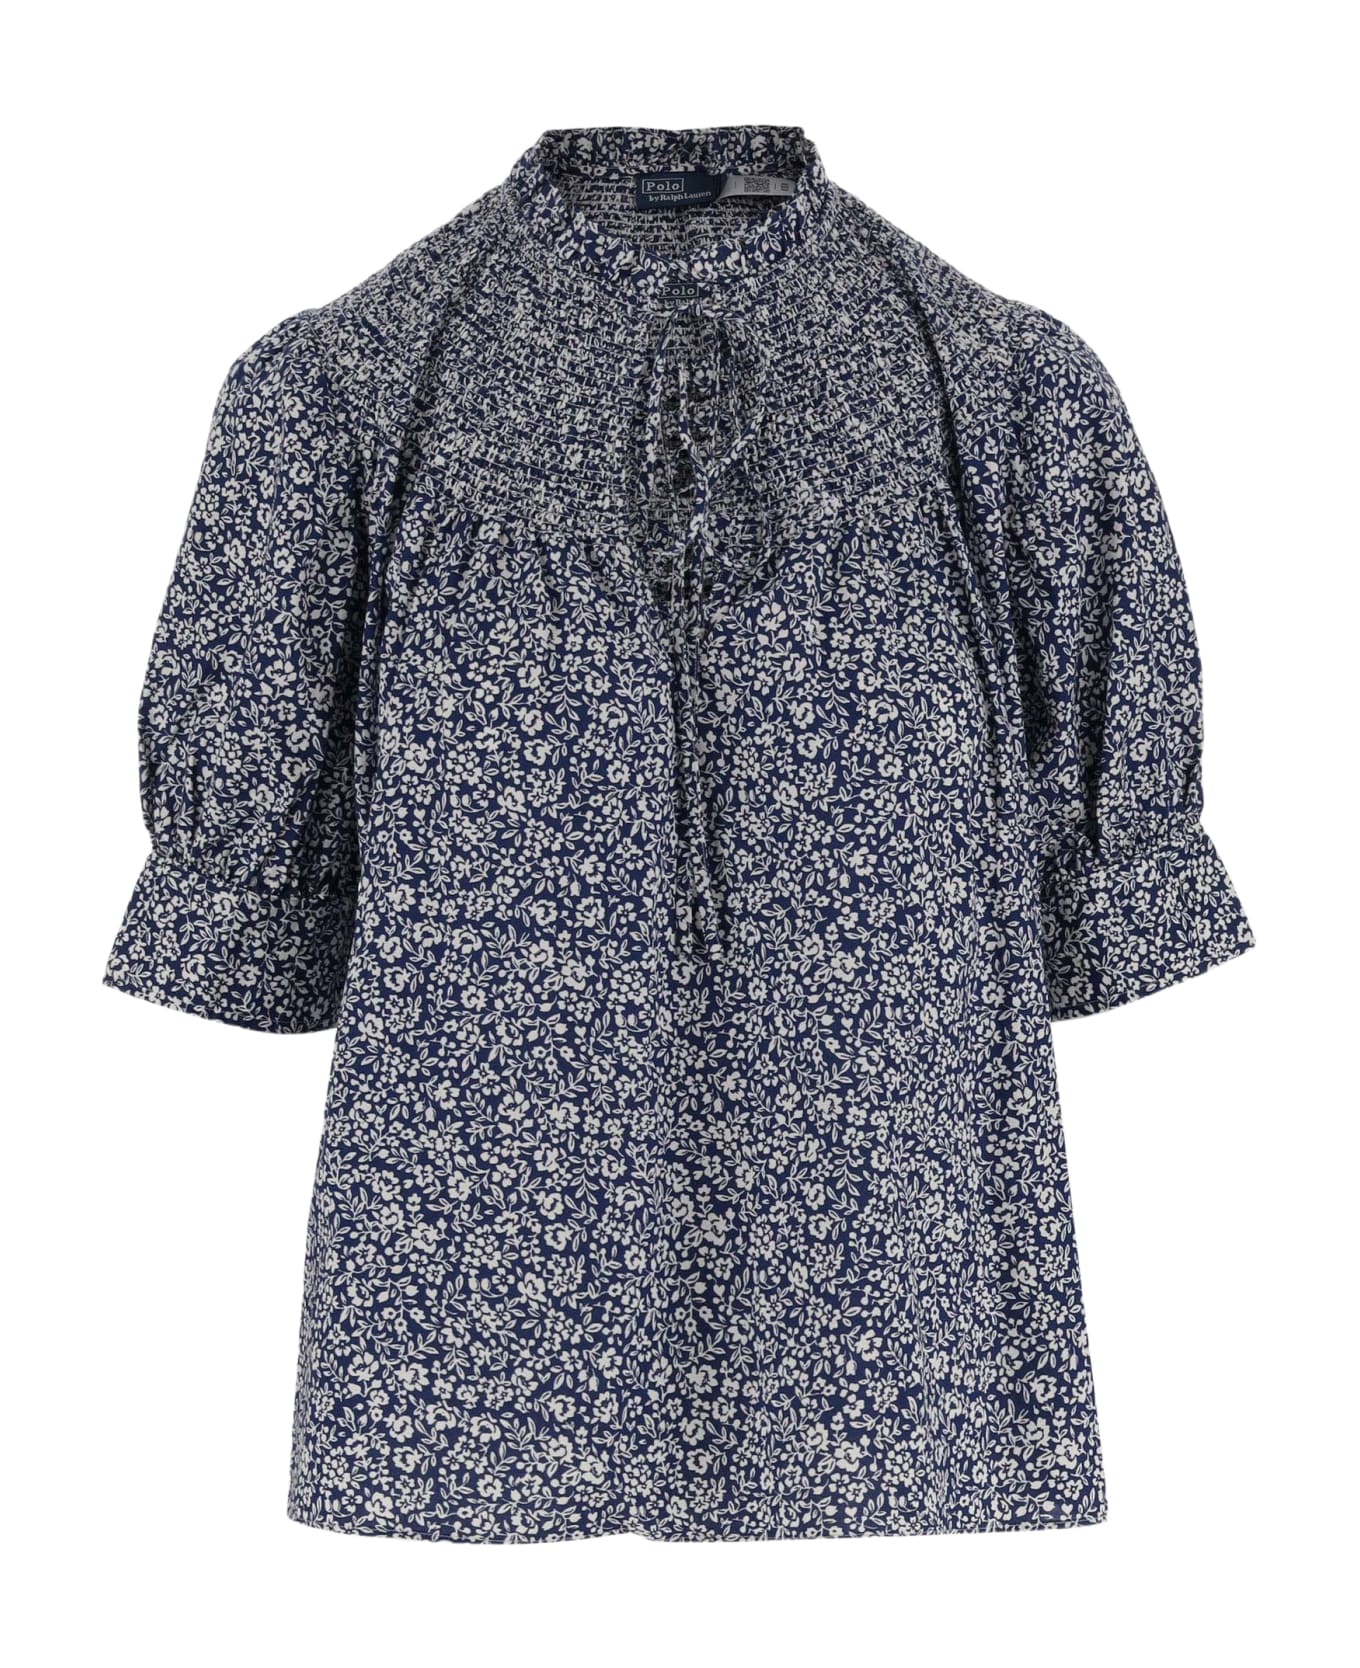 Ralph Lauren Cotton Shirt With Floral Pattern - Red